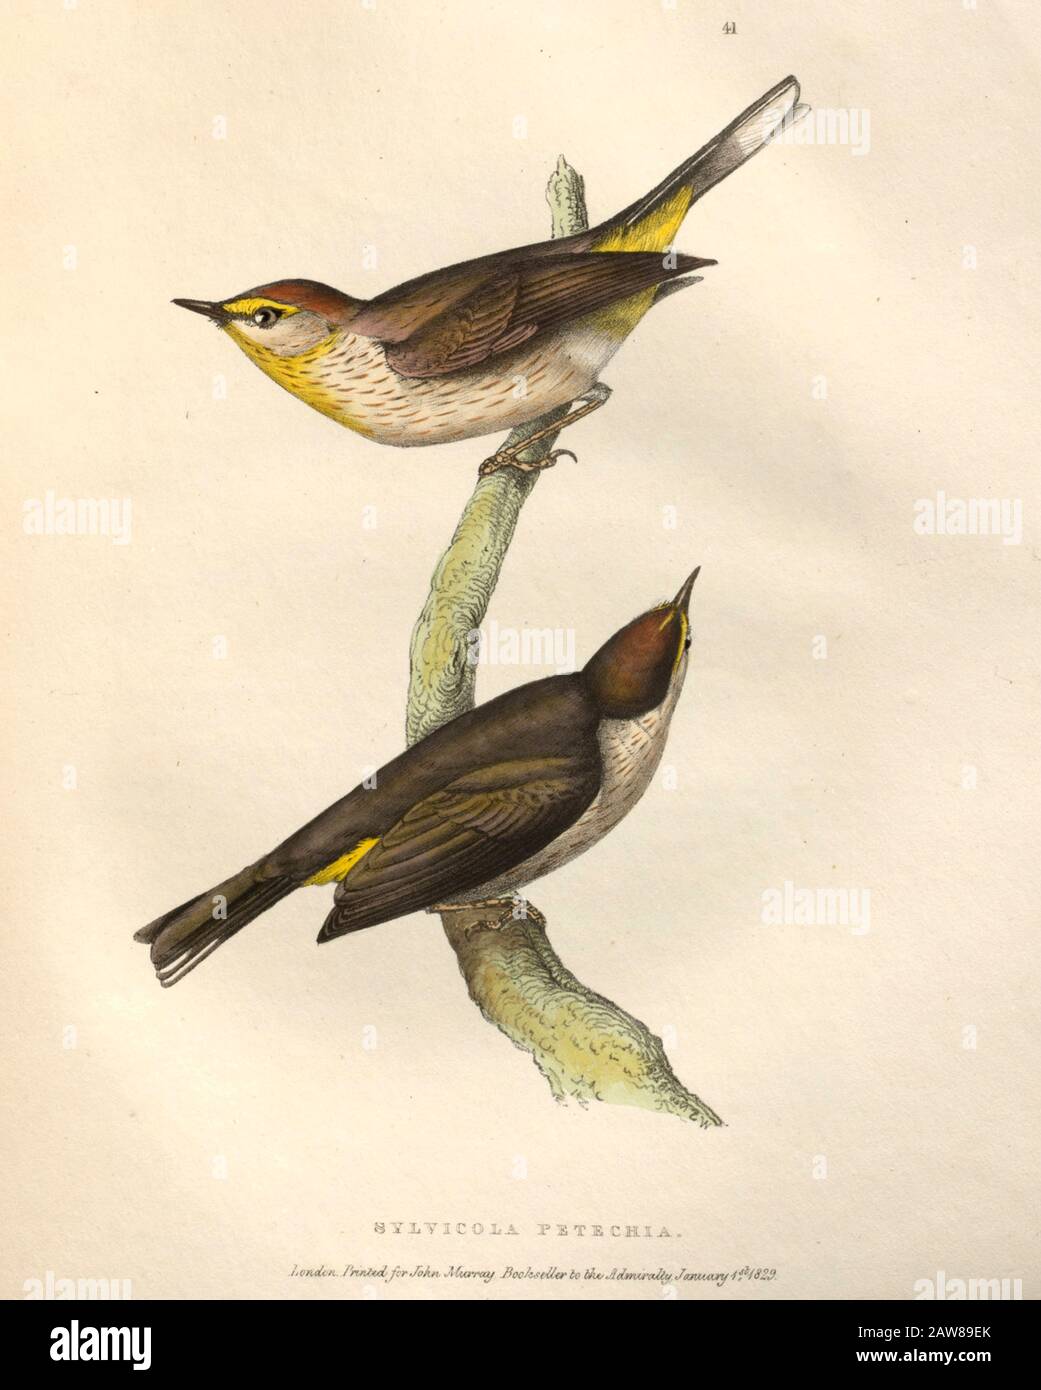 Orange-crowned Warbler (Sylvicola petechia), color plate of North American birds from Fauna boreali-americana; or, The zoology of the northern parts of British America, containing descriptions of the objects of natural history collected on the late northern land expeditions under command of Capt. Sir John Franklin by Richardson, John, Sir, 1787-1865 Published 1829 Stock Photo